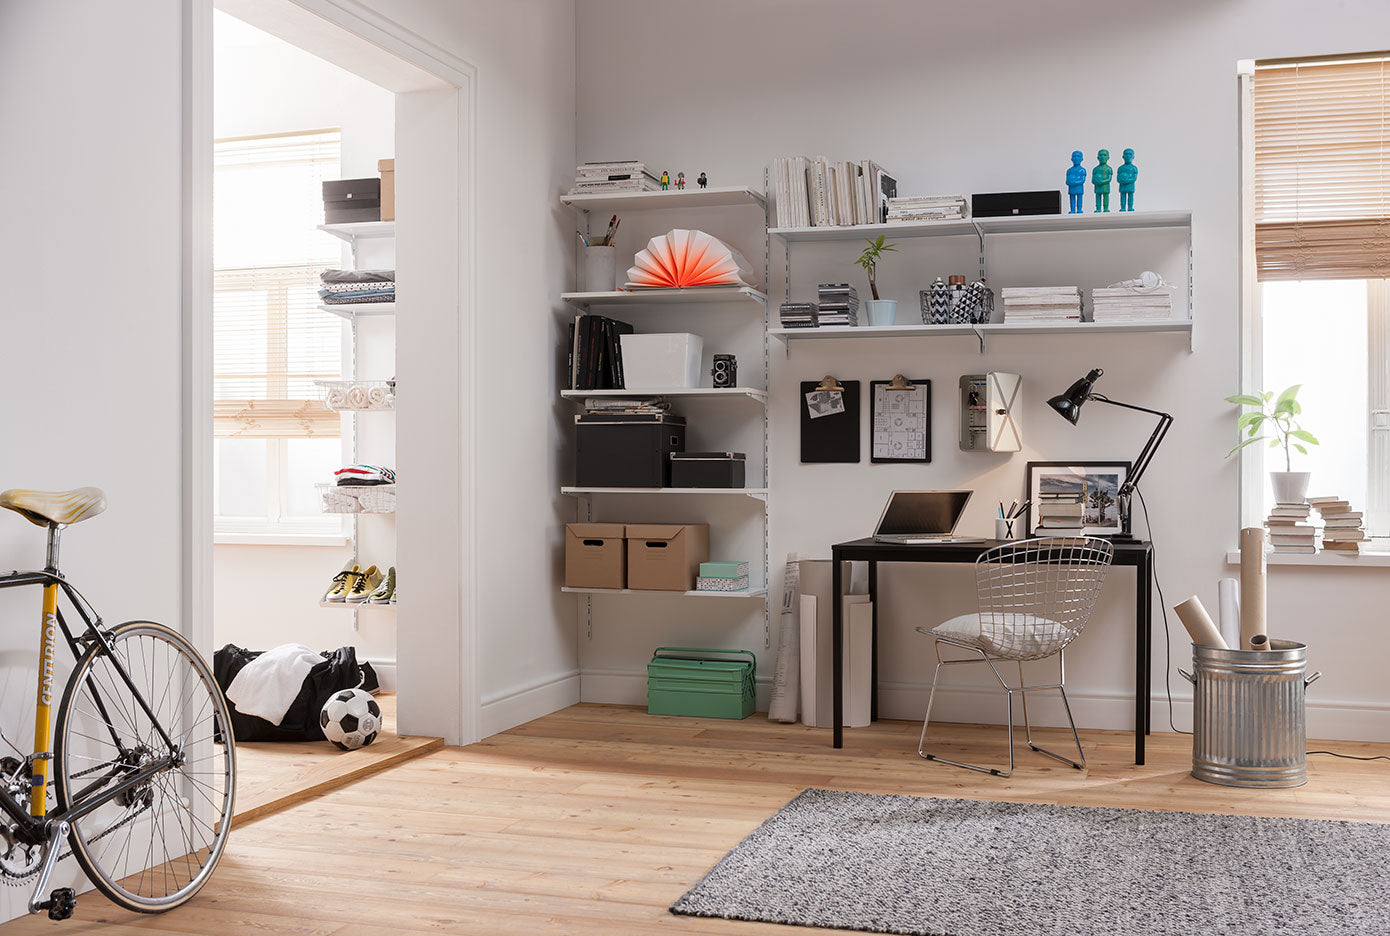 5 Easy Ways to Free Up Space in Your Home